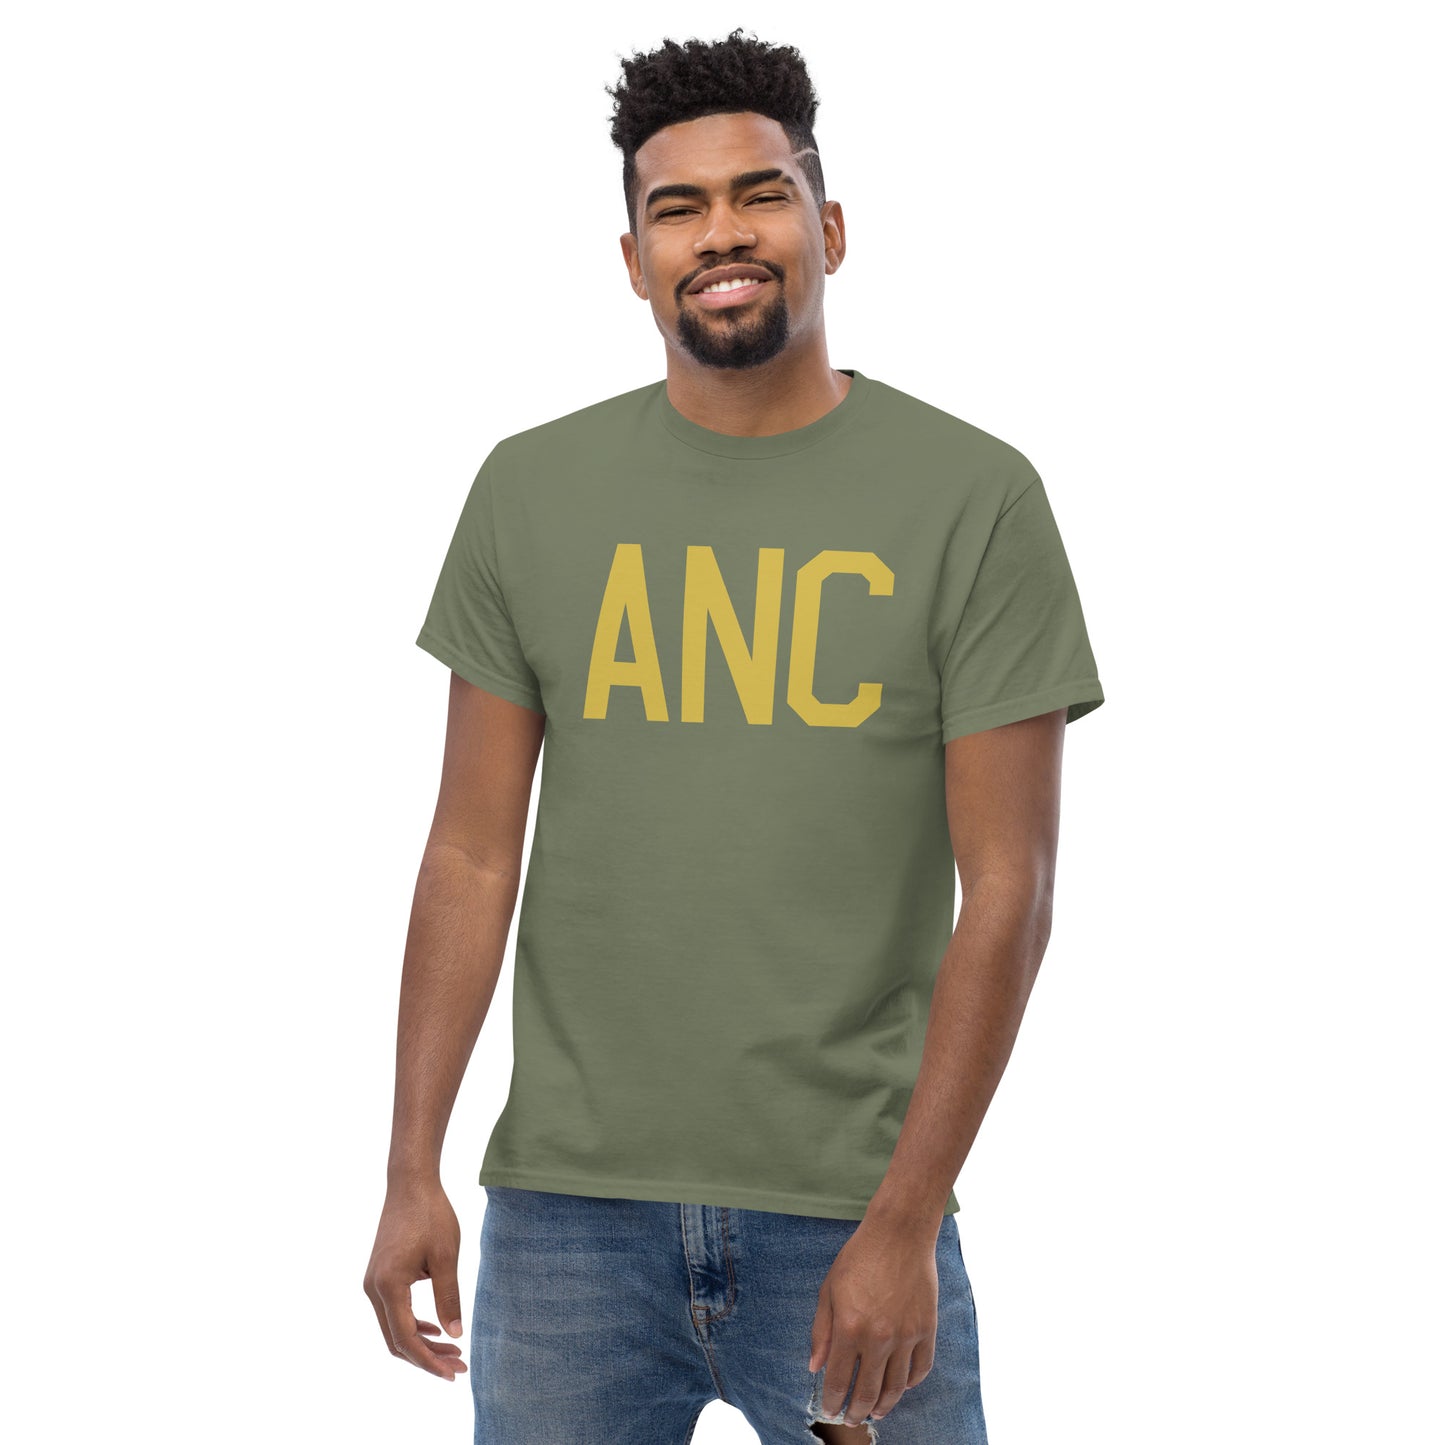 Aviation Enthusiast Men's Tee - Old Gold Graphic • ANC Anchorage • YHM Designs - Image 06